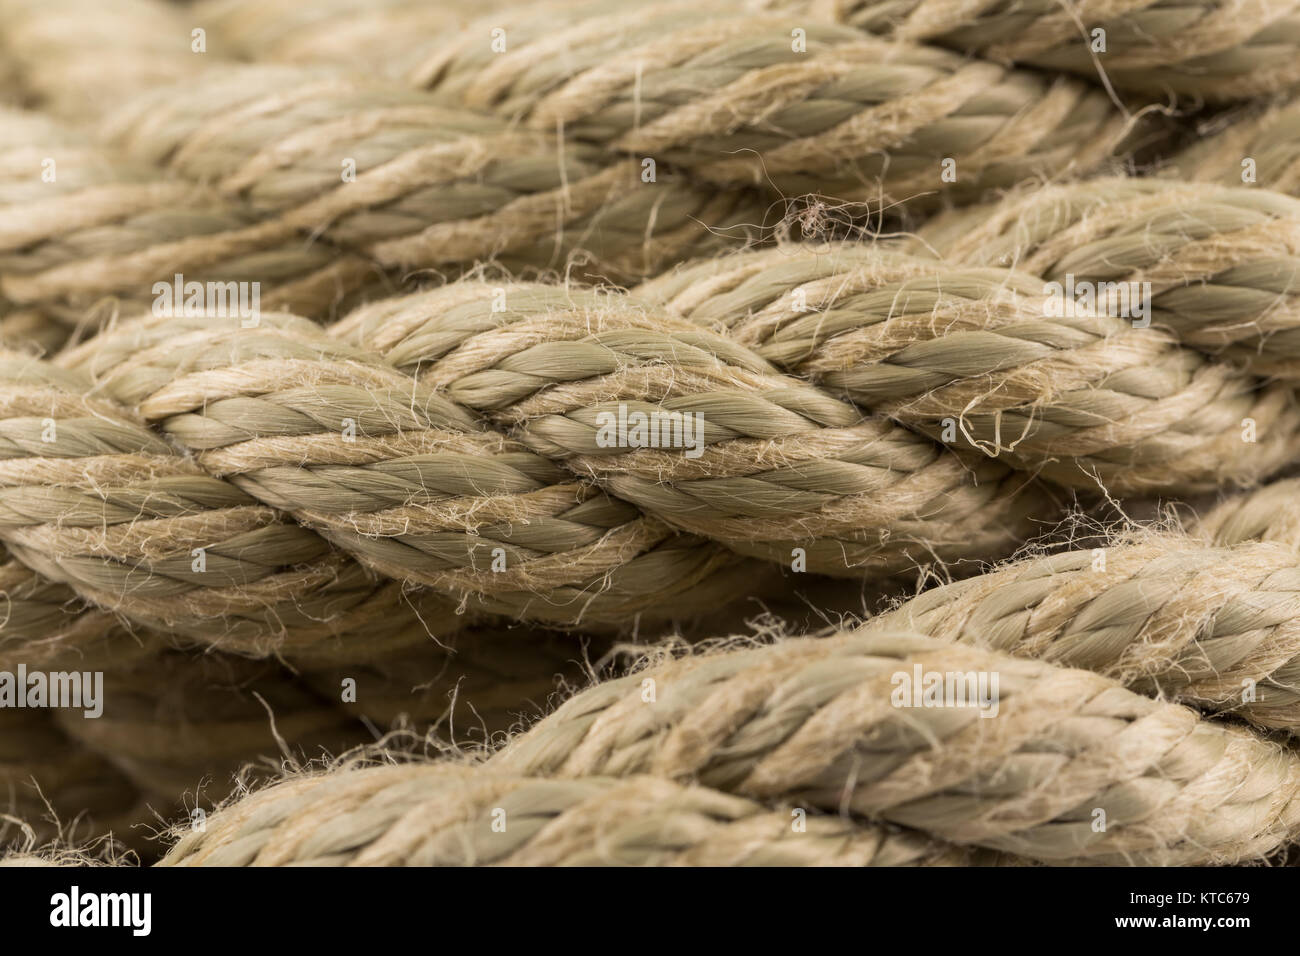 Thick Rope stock image. Image of texture, fiber, strength - 12713601